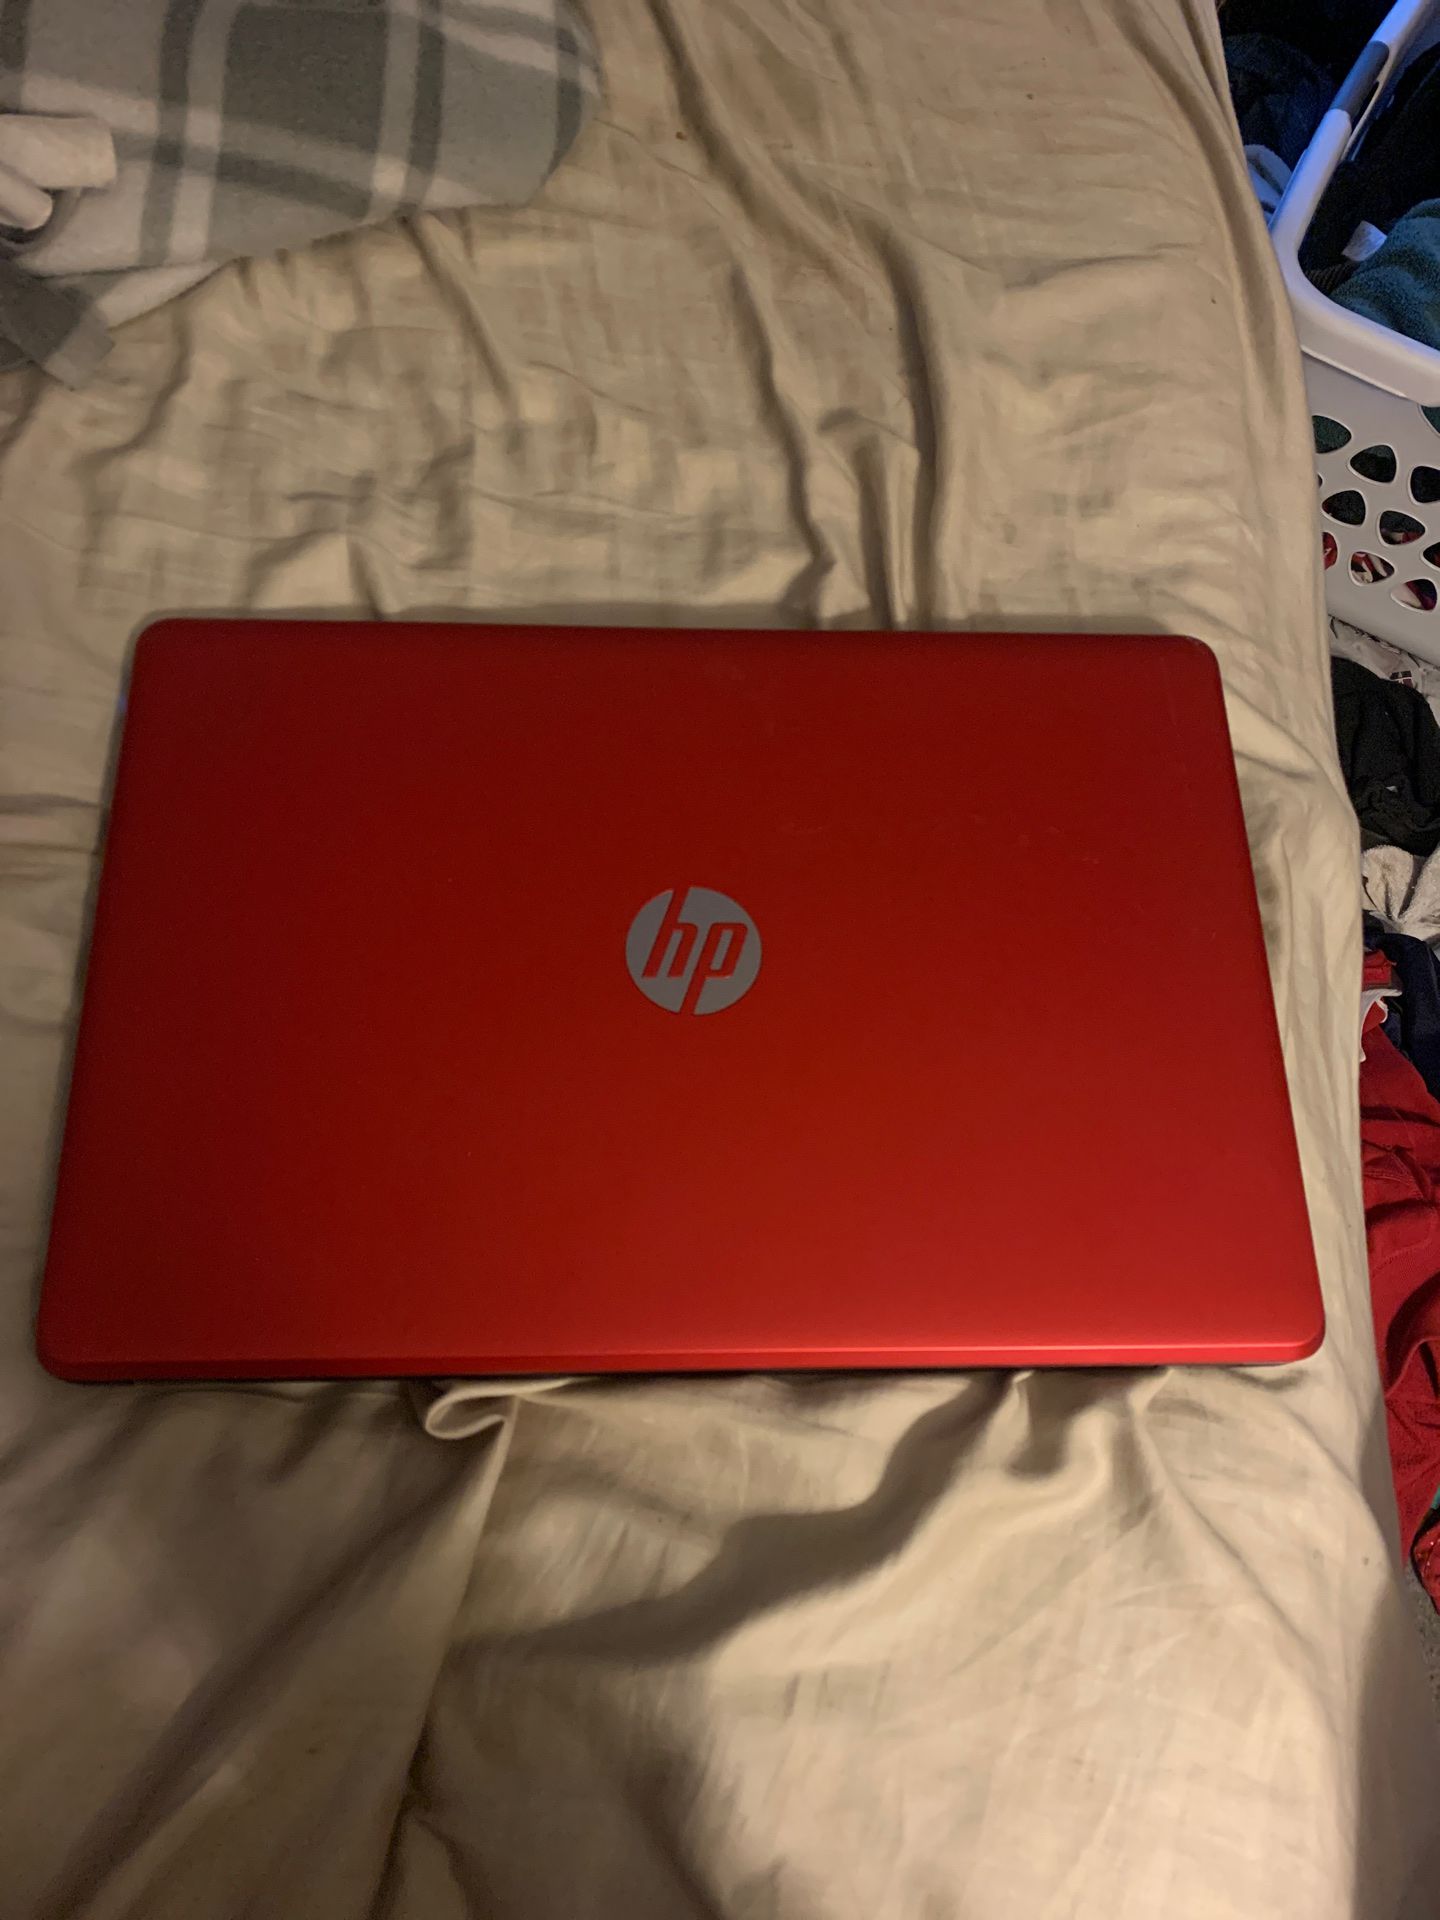 HP touch screen laptop 15.6”